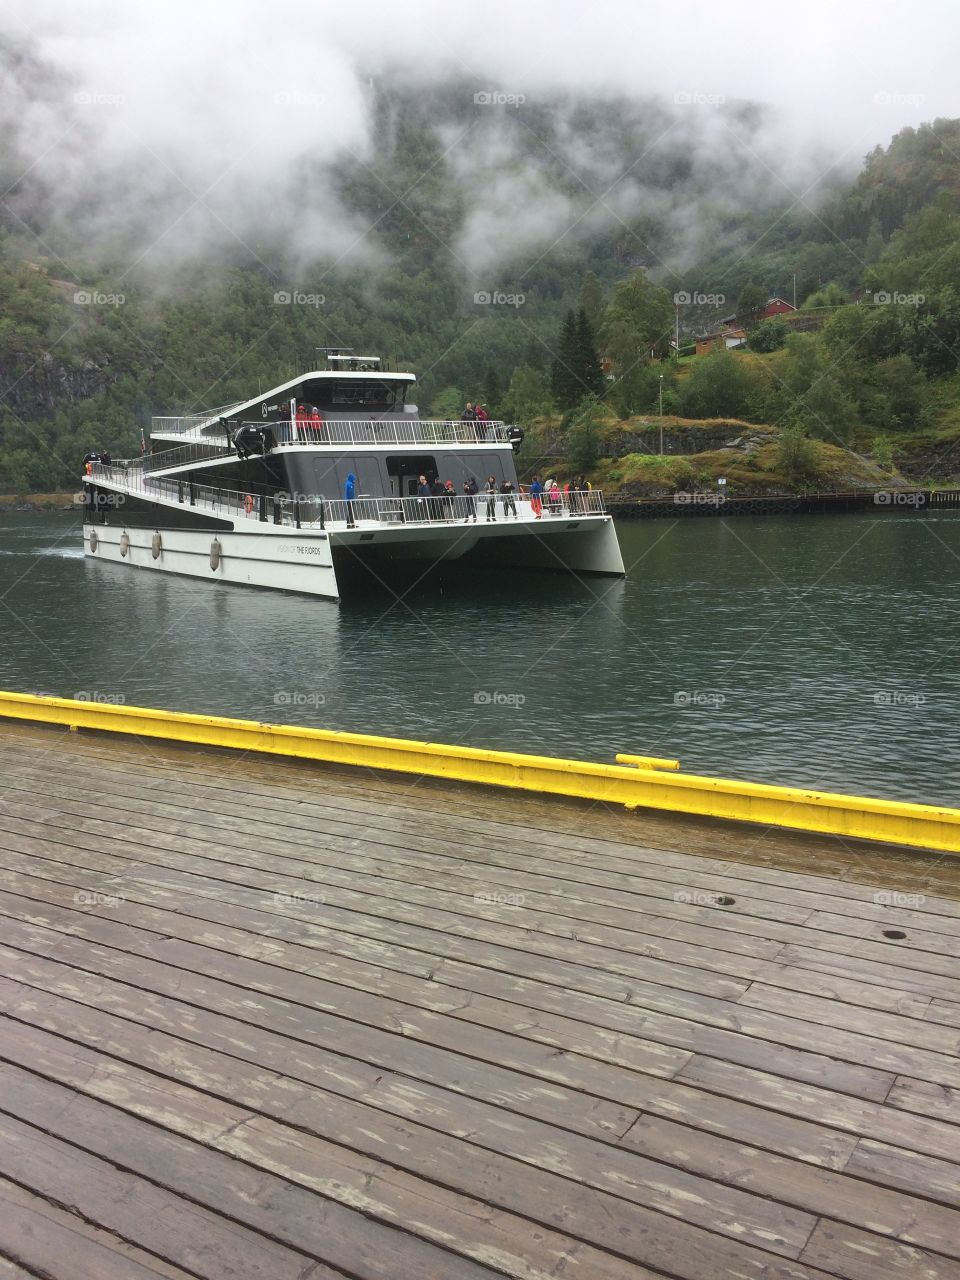 Vision of Fjords arriving Flåm after taking some tourists on a fjord sightseeing. The weather was greay and foggy, but that doesn’t stop people from traveling.